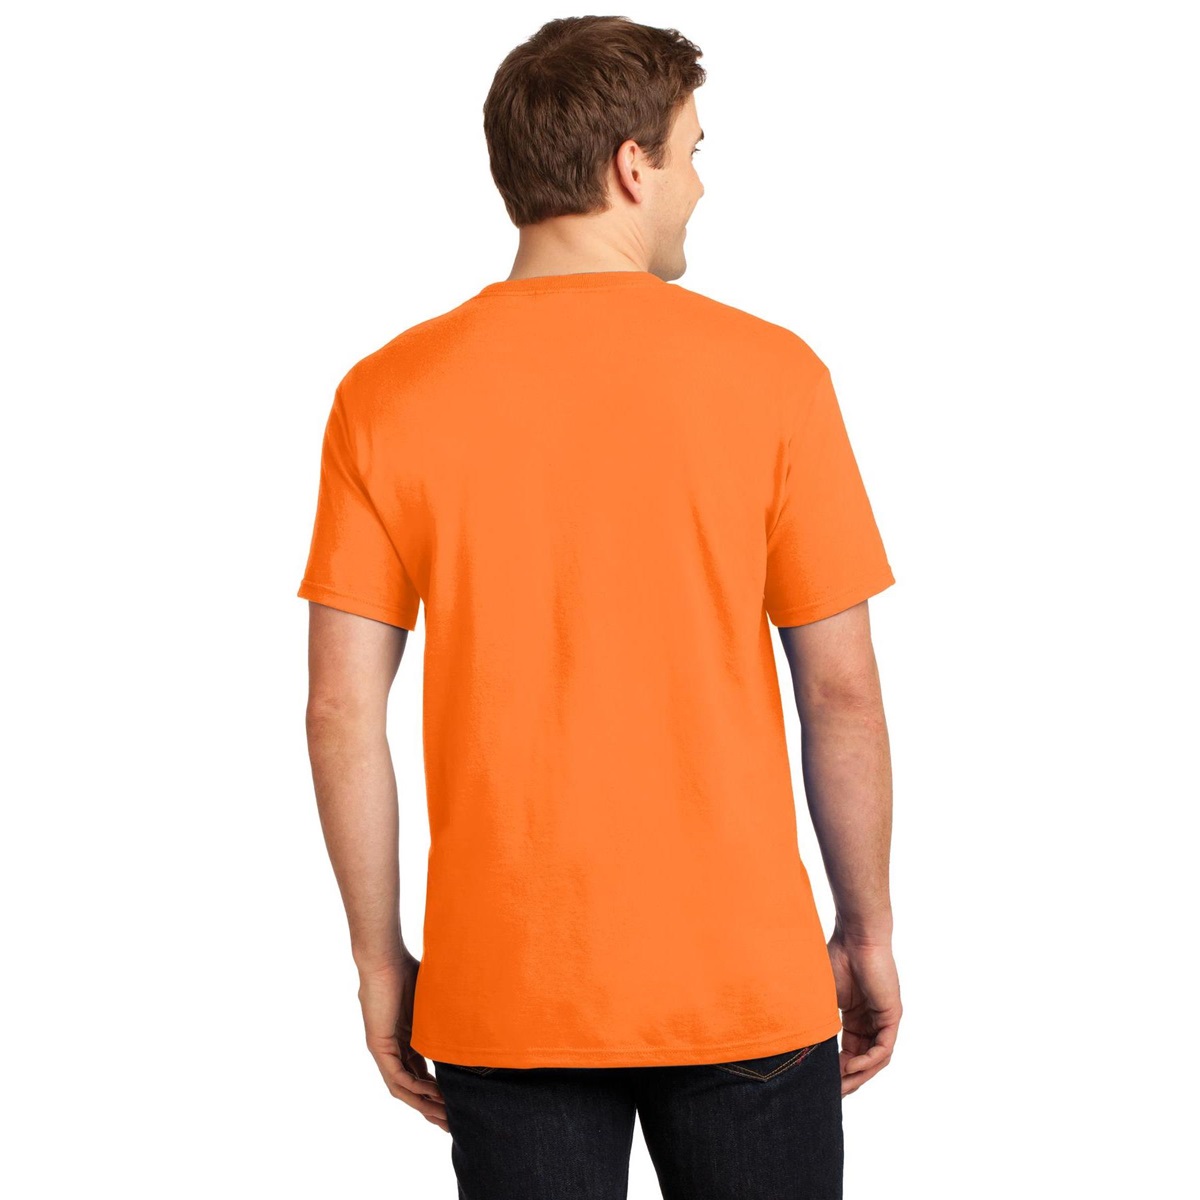 Jerzees 29MP Heavyweight Blend T-Shirt with Pocket - Safety Orange ...